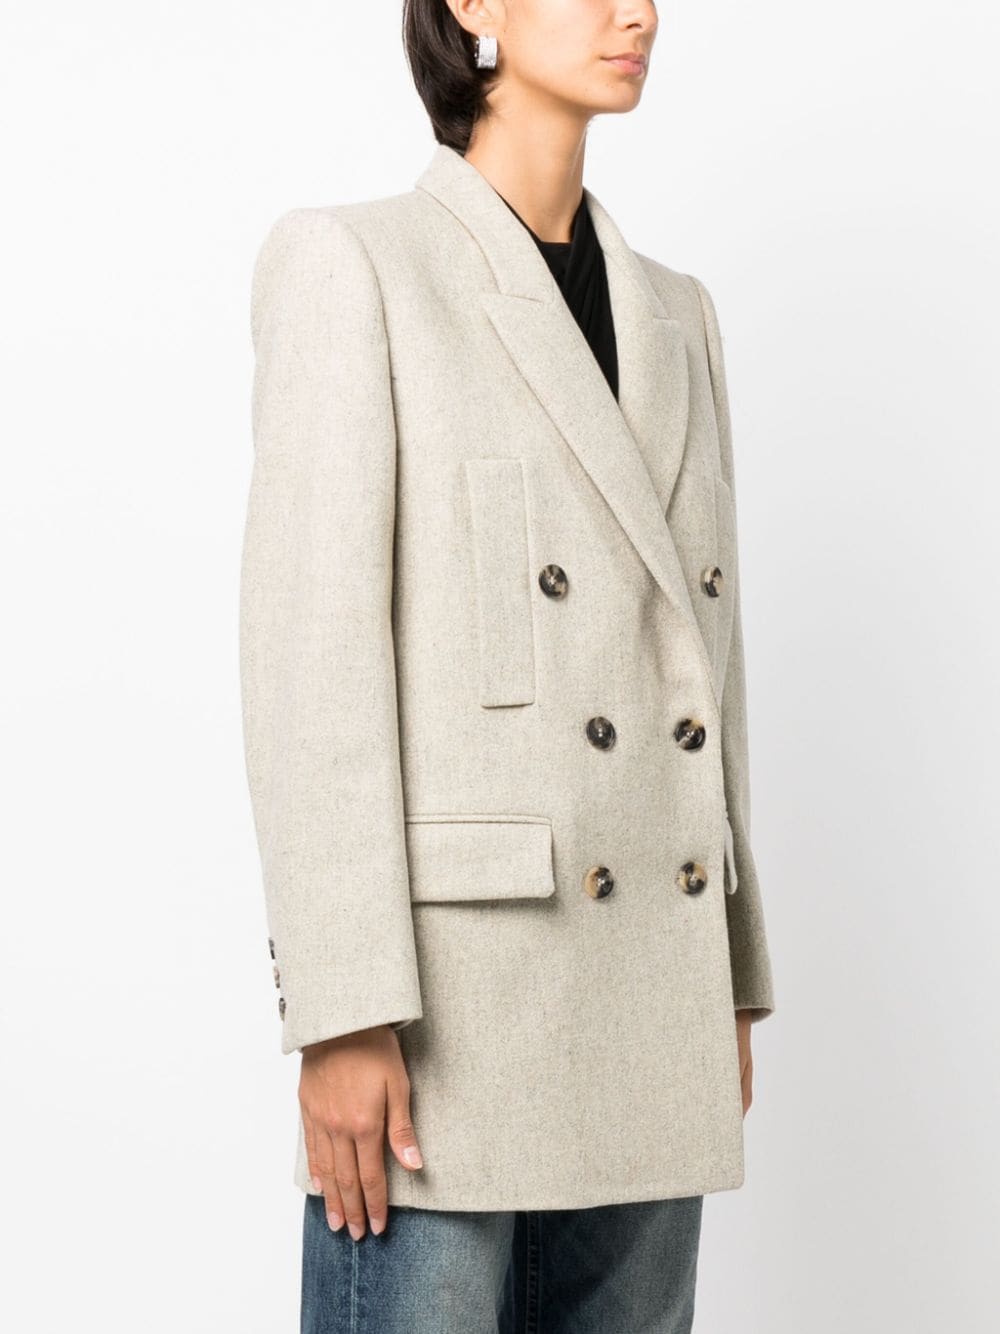 ISABEL MARANT Mélange-effect Double-breasted Wool-blend Blazer for Women in Beige - FW23 Collection